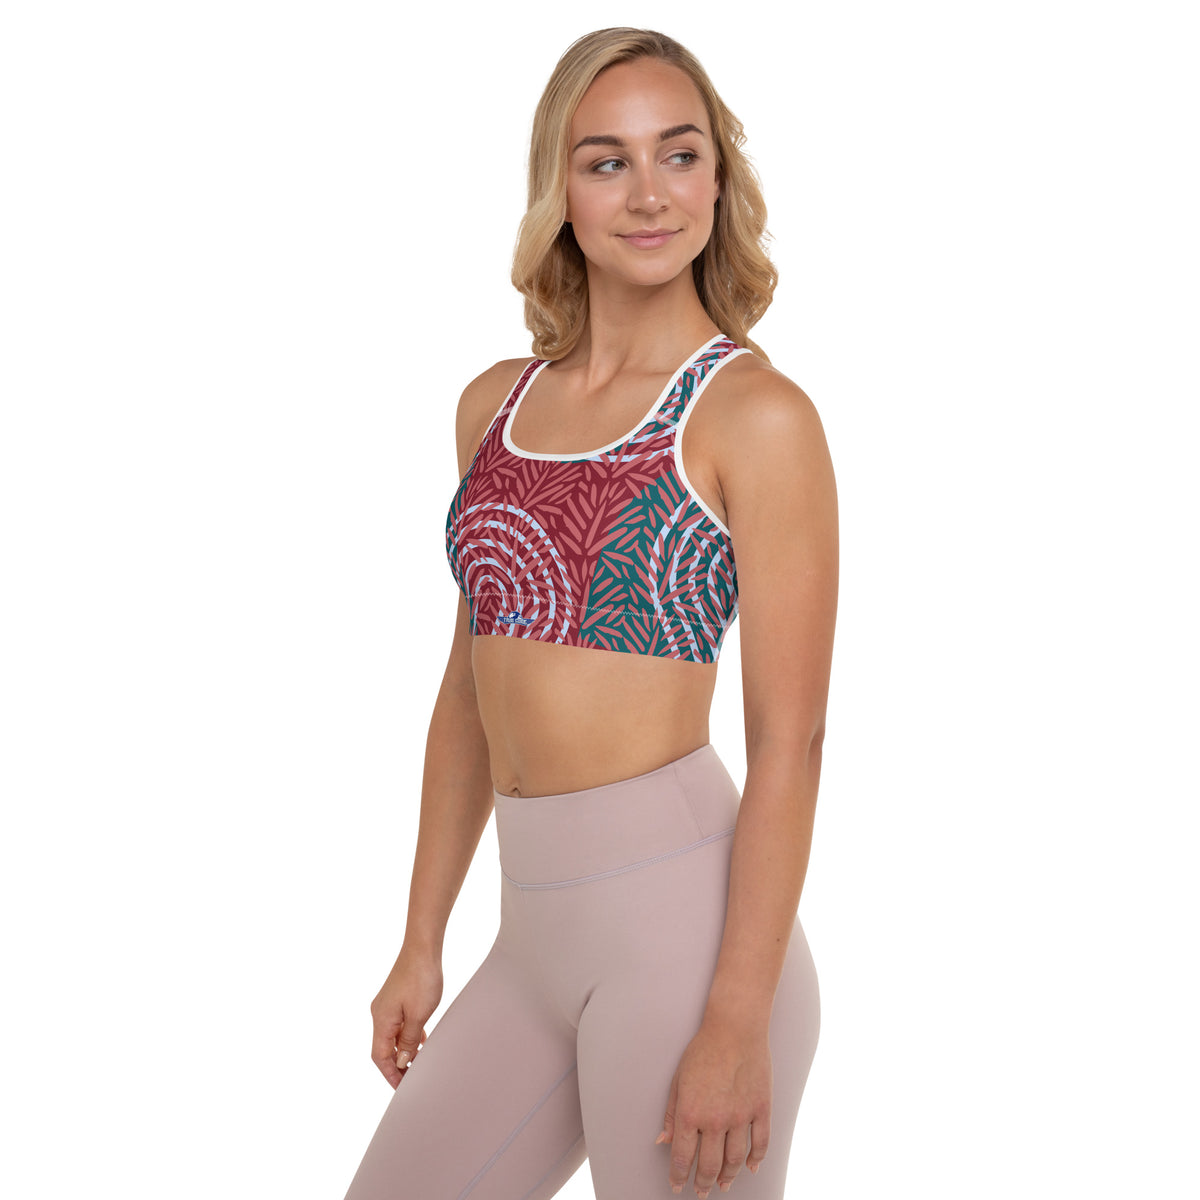 TG Two Toned Padded Sports Bra